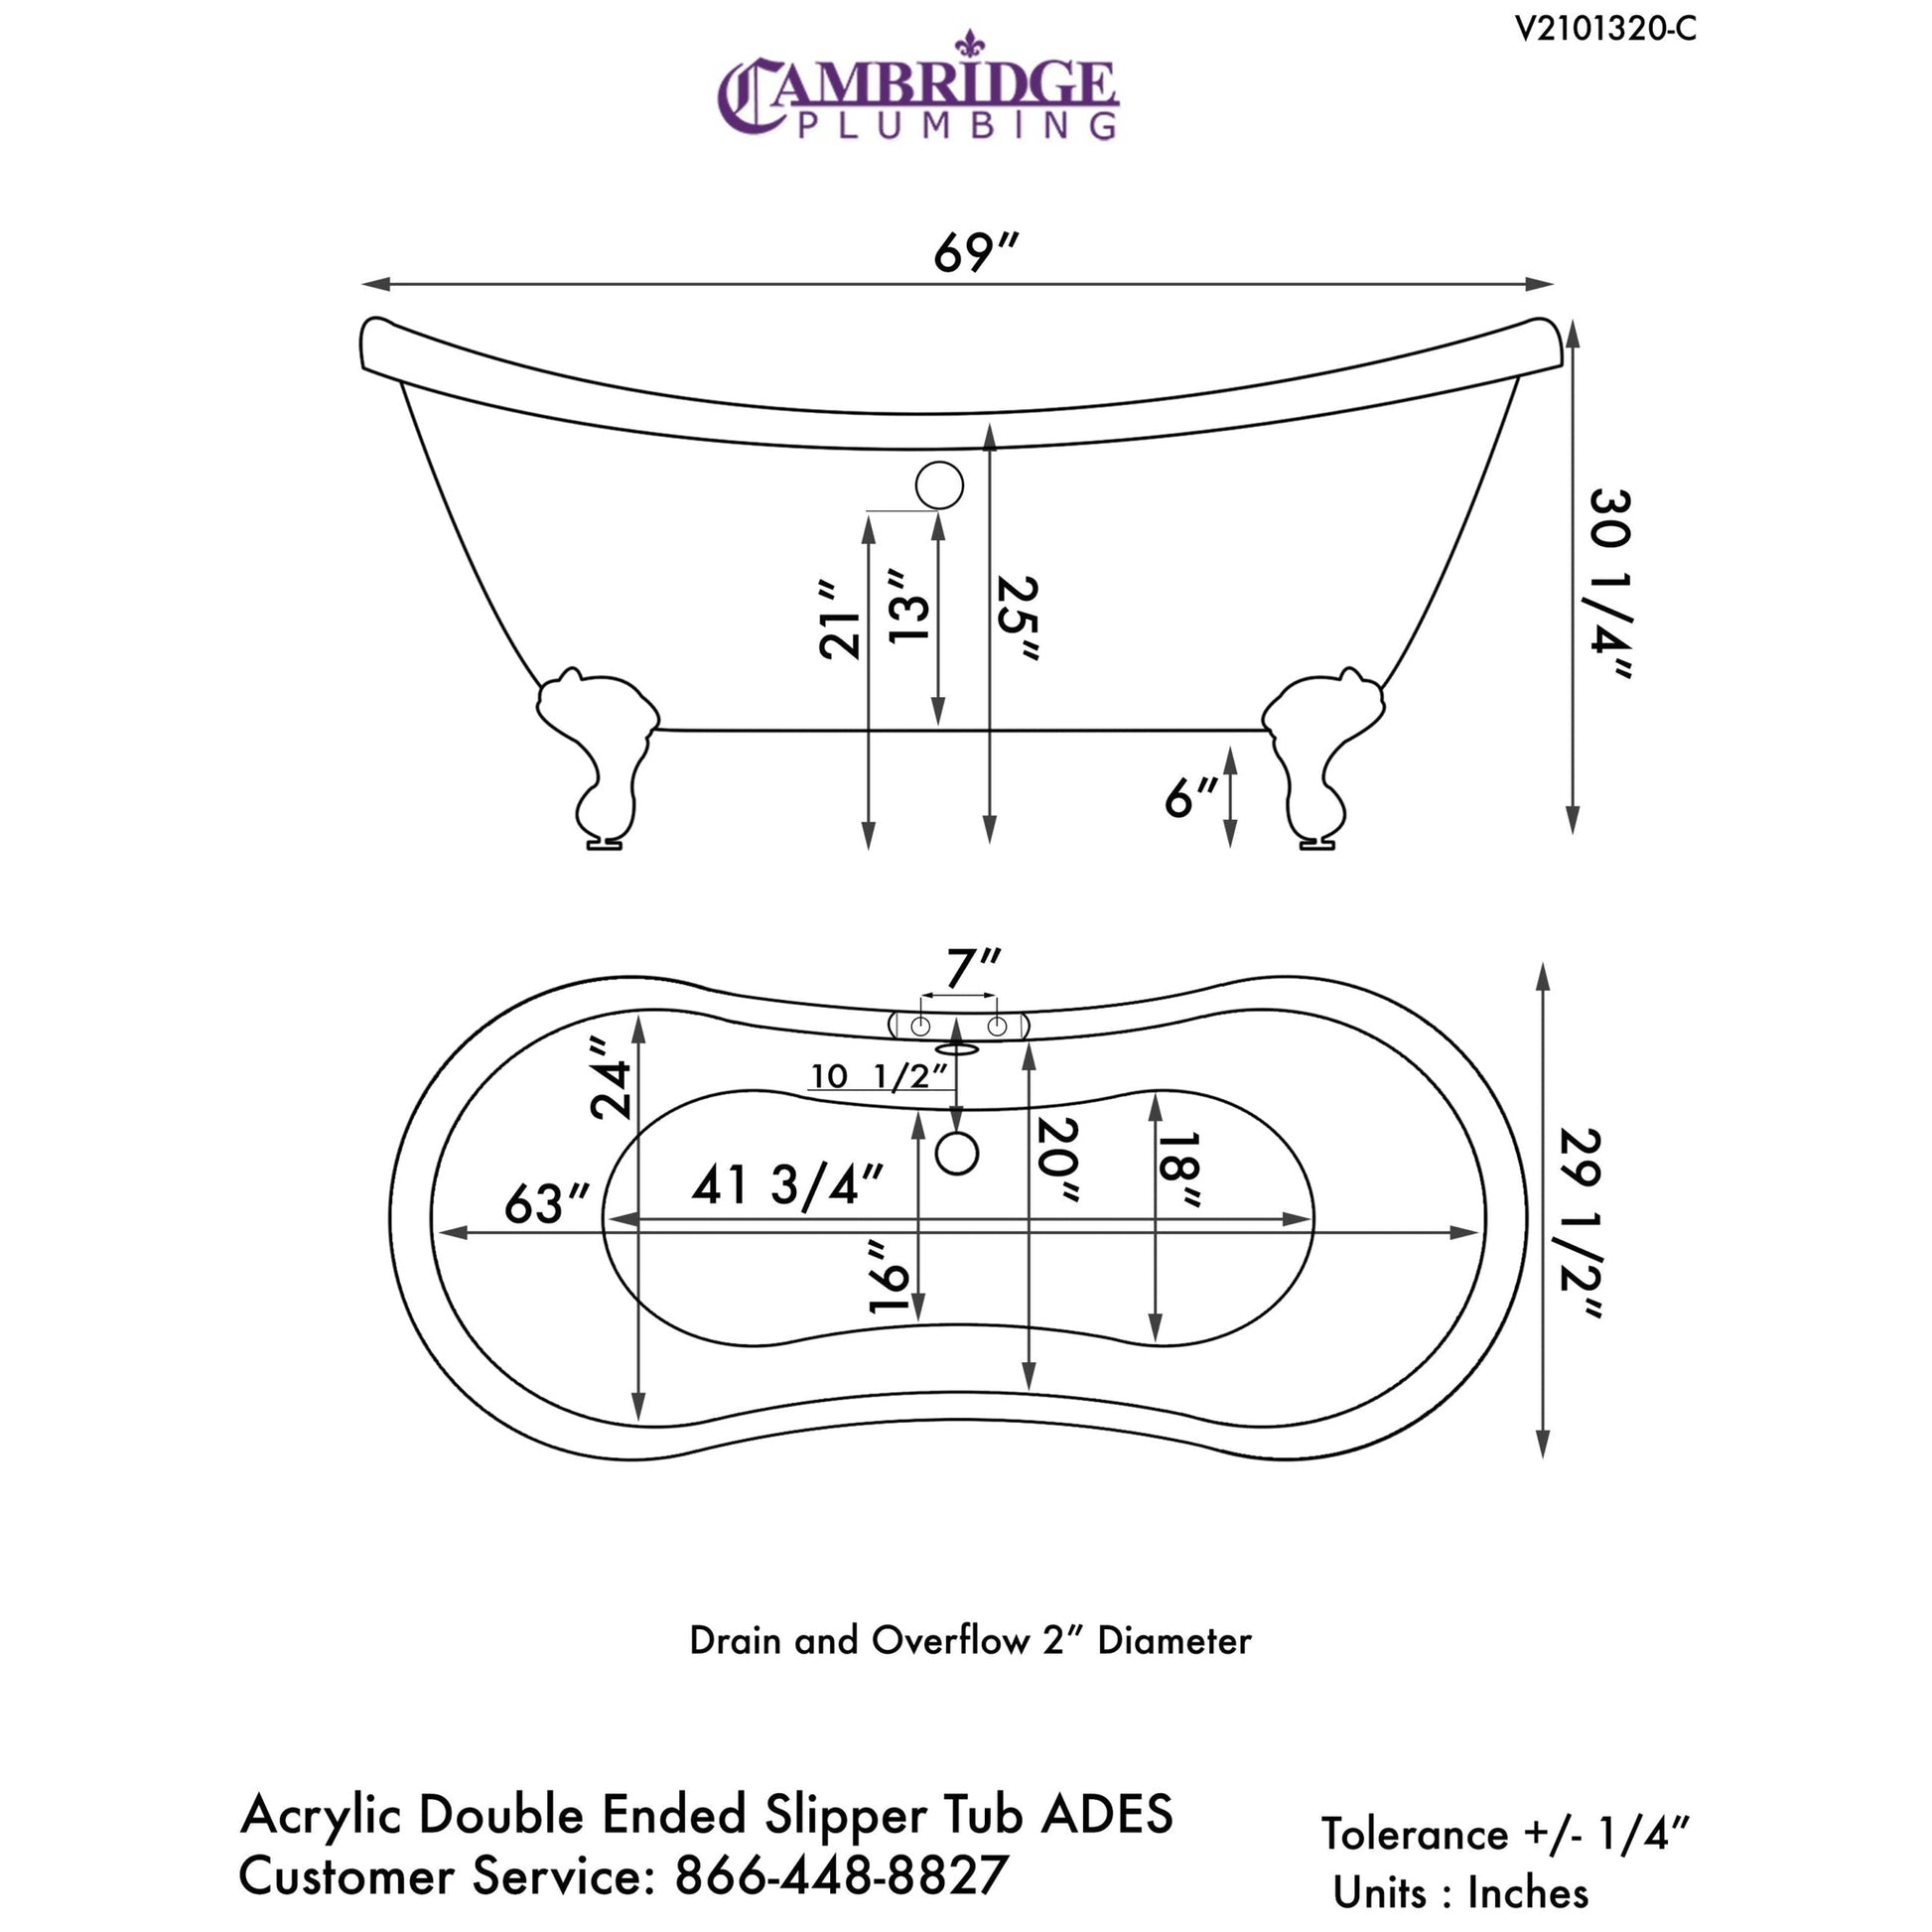 Cambridge Plumbing 69" White Double Slipper Clawfoot Acrylic Bathtub With Deck Holes With Oil Rubbed Bronze Feet